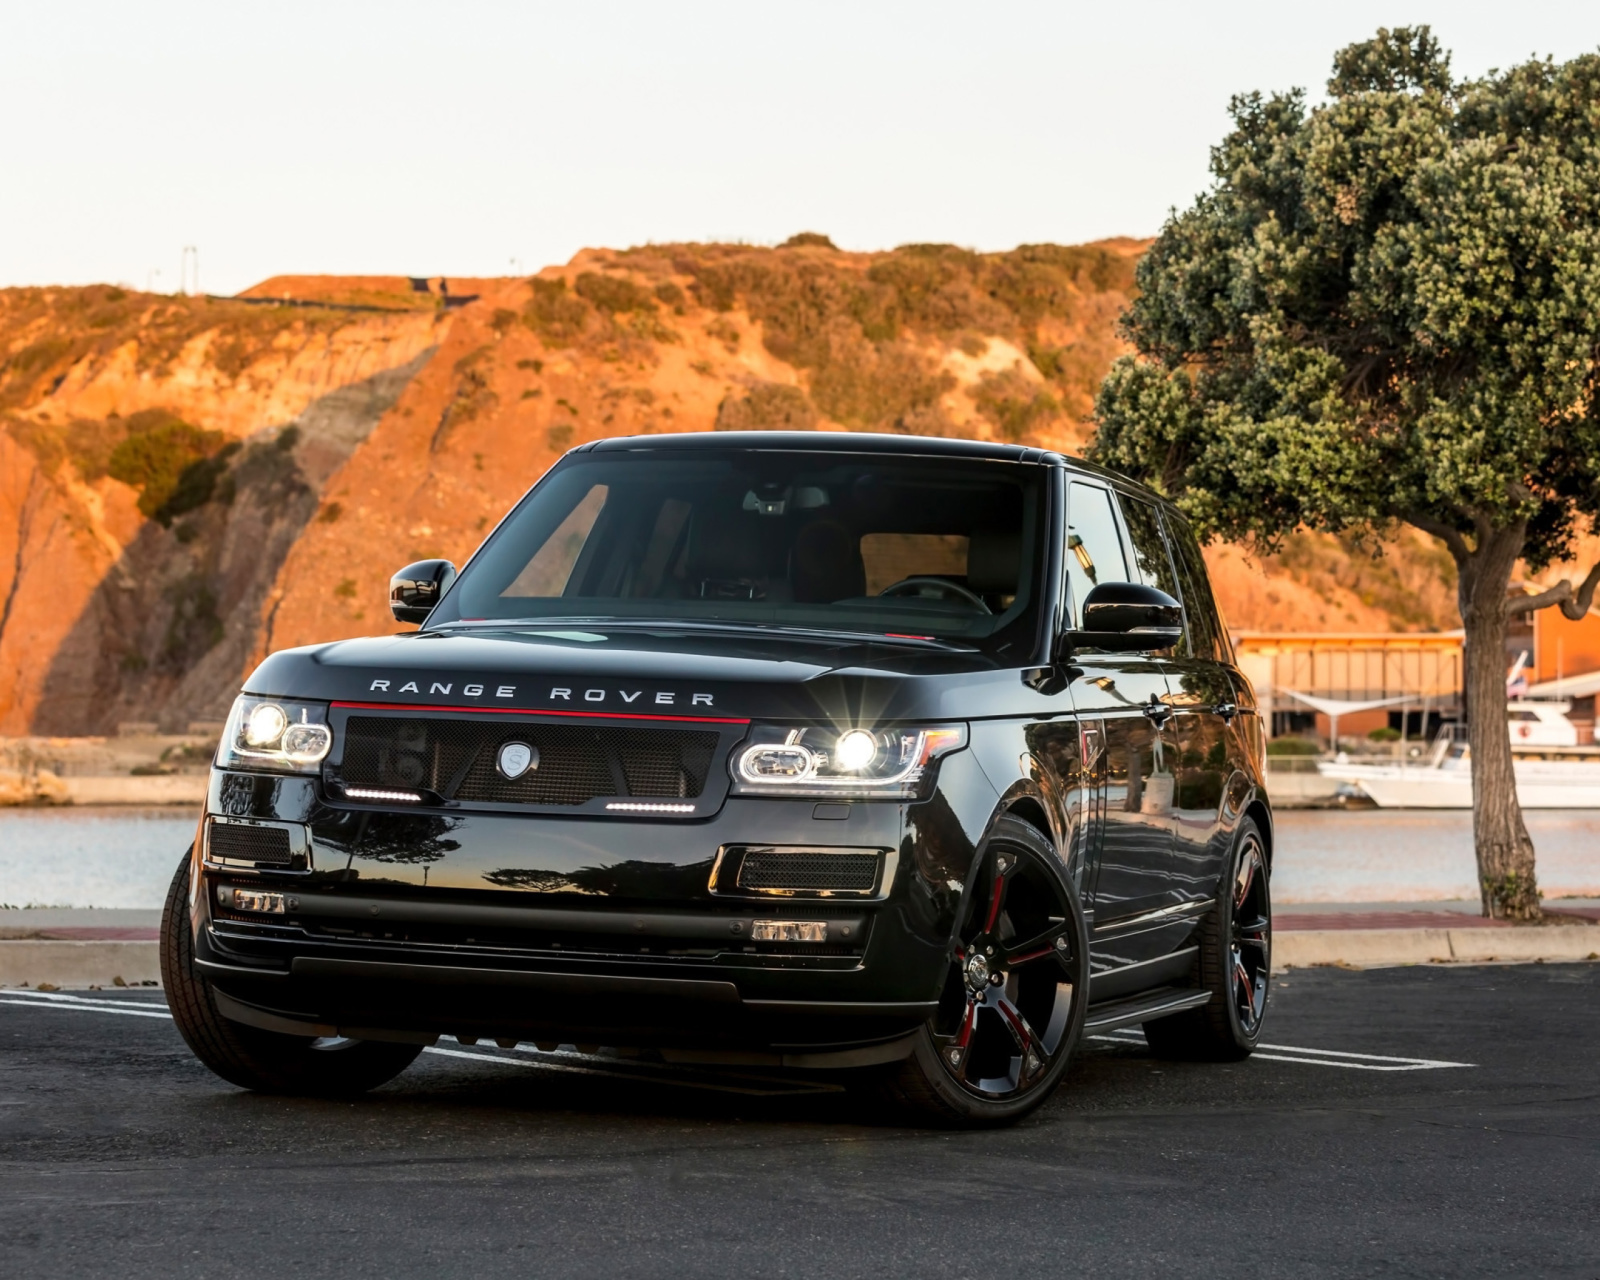 Range Rover STRUT with Grille Package wallpaper 1600x1280